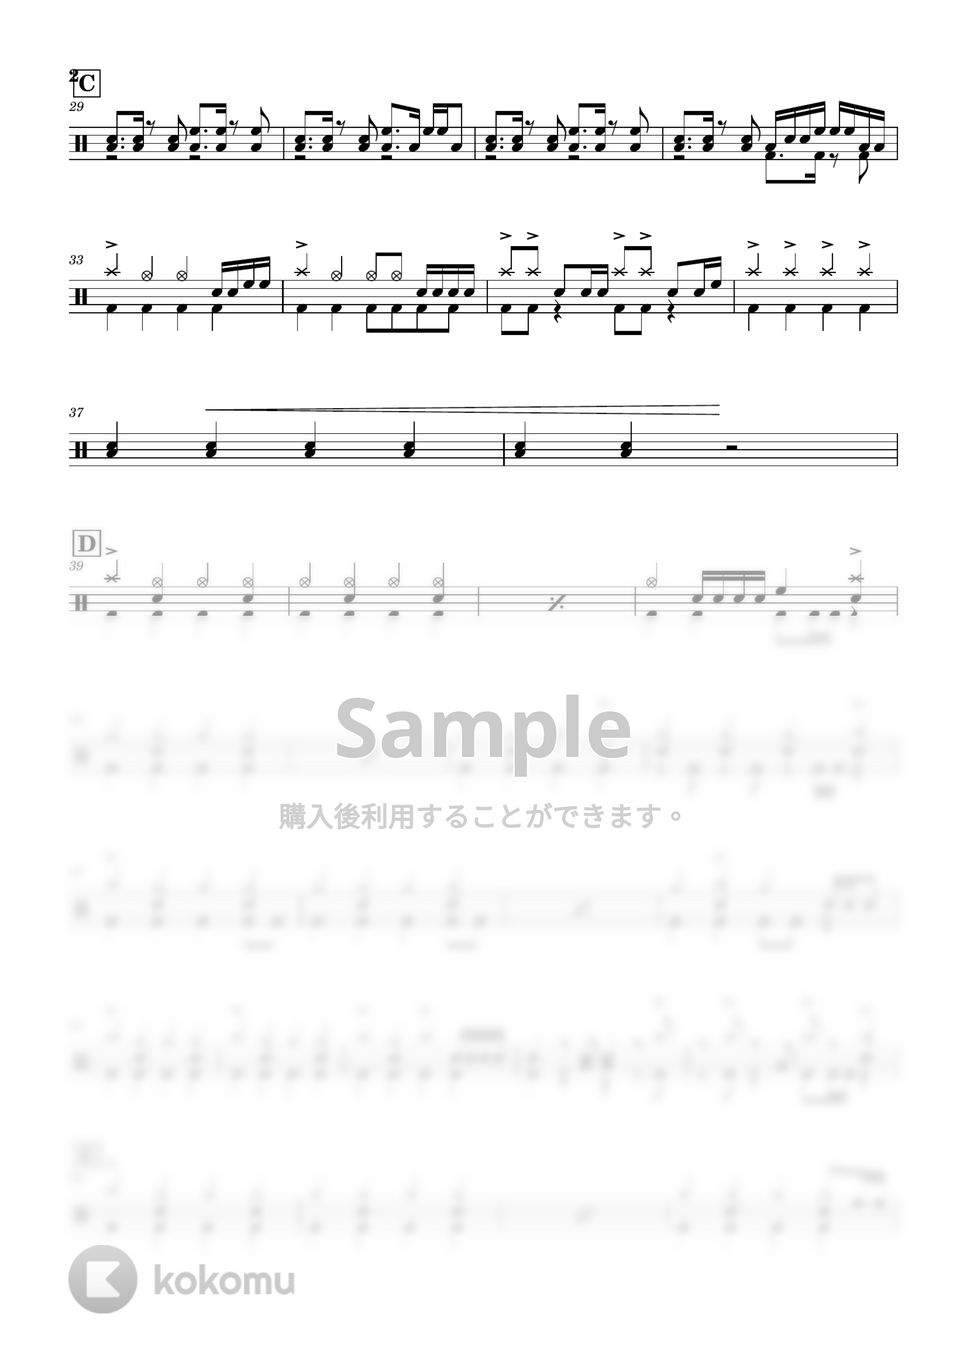 Ado - うっせぇわ by Cookie's Drum Score